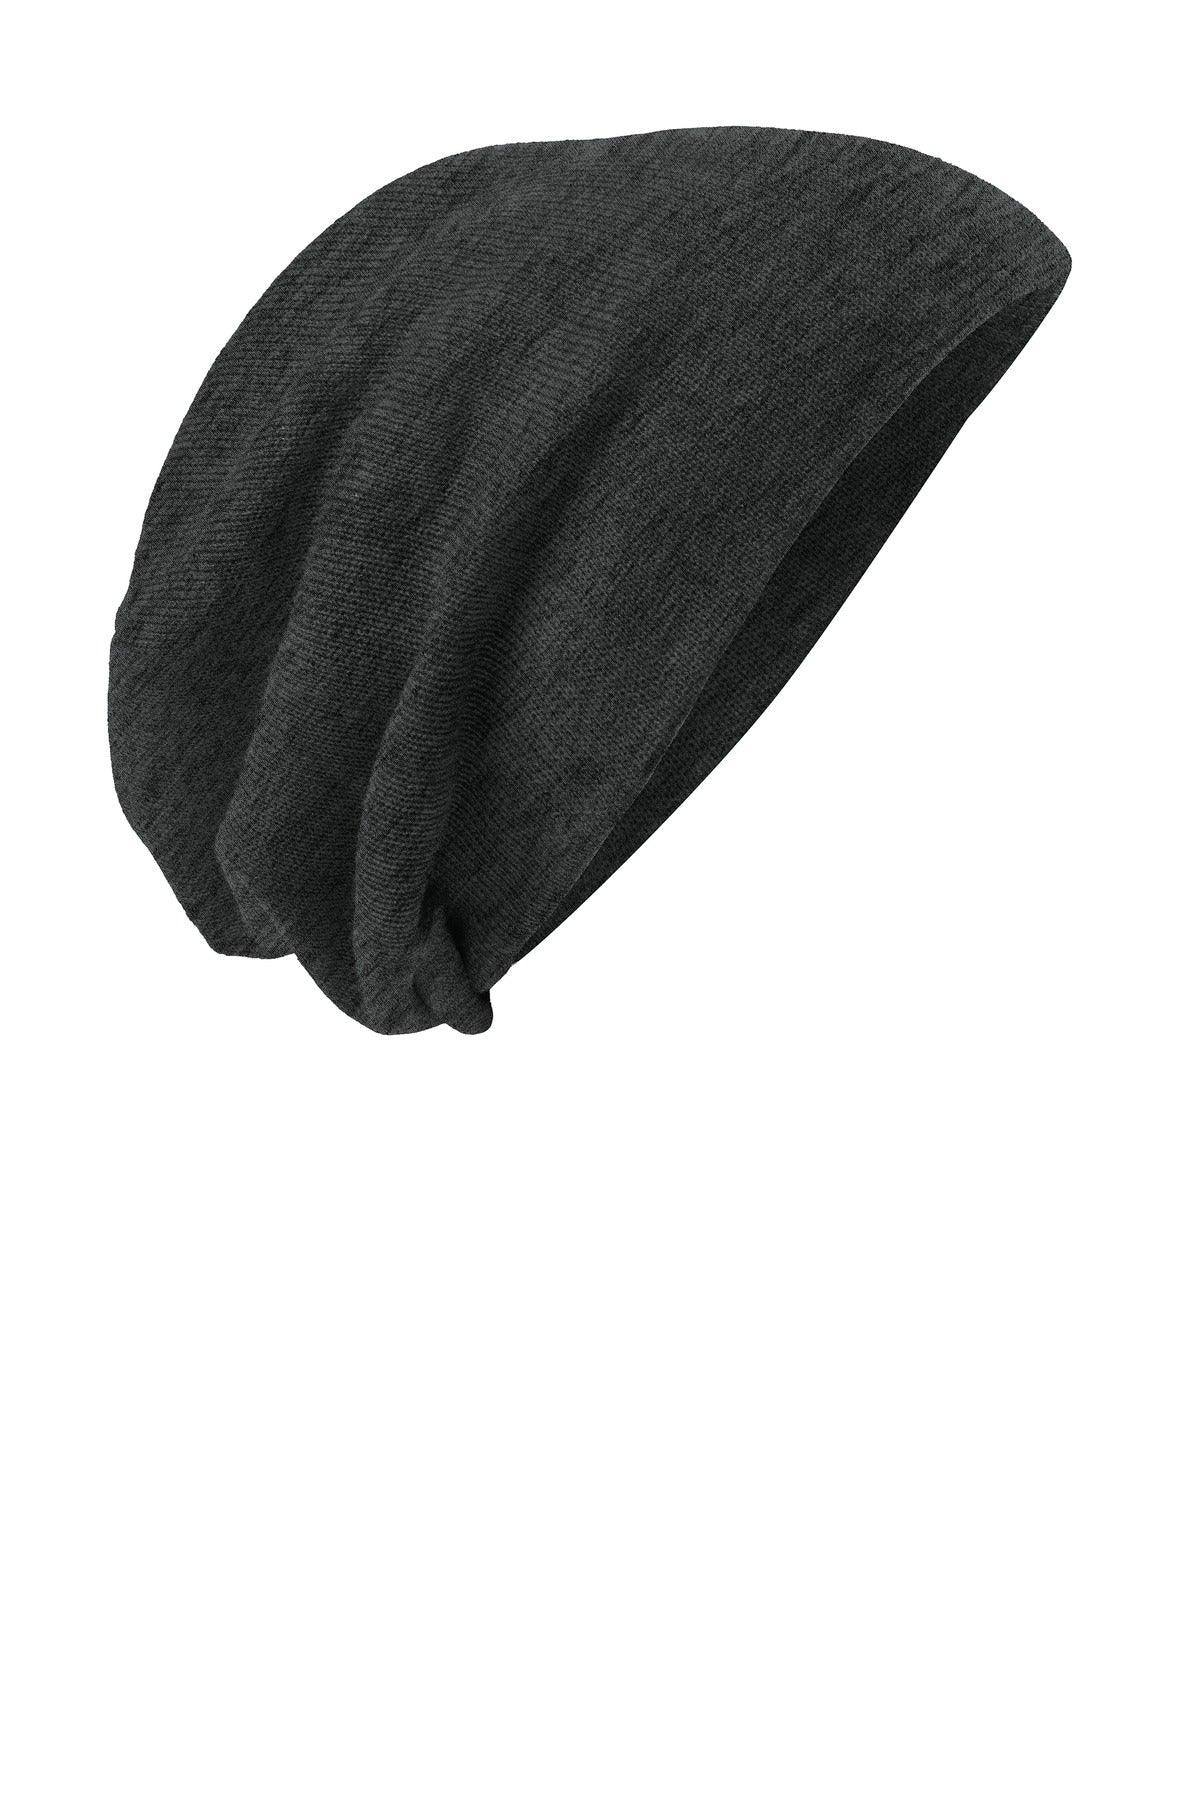 District Slouch Beanie DT618 - Dresses Max